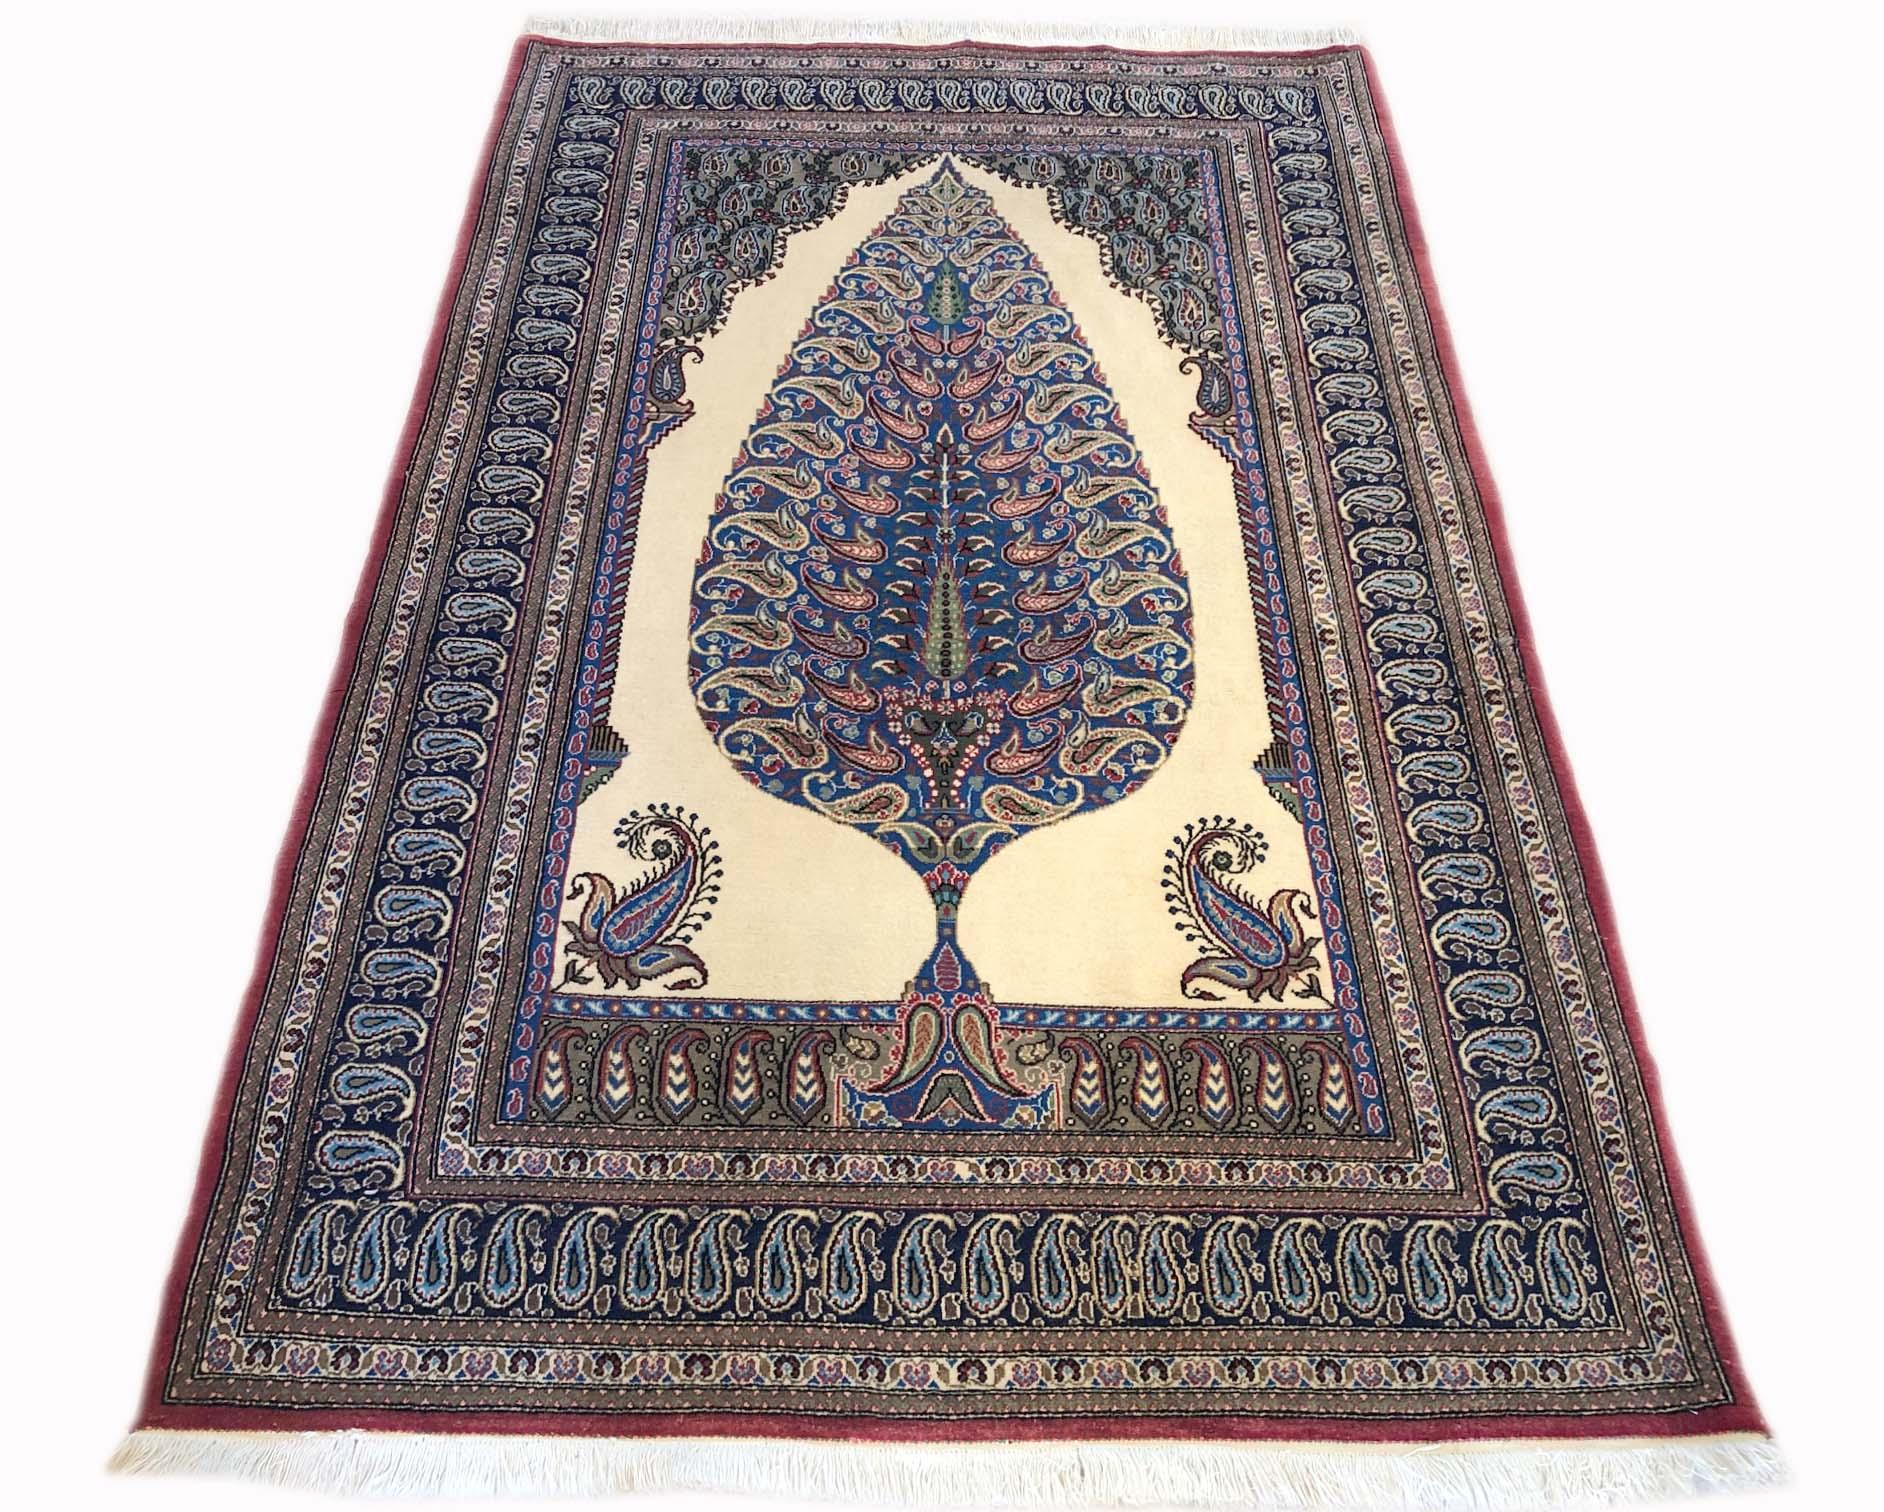 This beautiful Persian Qum rug has wool pile with cotton foundation. The size is 3 feet 5 inch by 5 feet 1 inches. The design is tree of life which is a popular element in many vintage Persian rugs, and is one of the oldest symbols found in rug